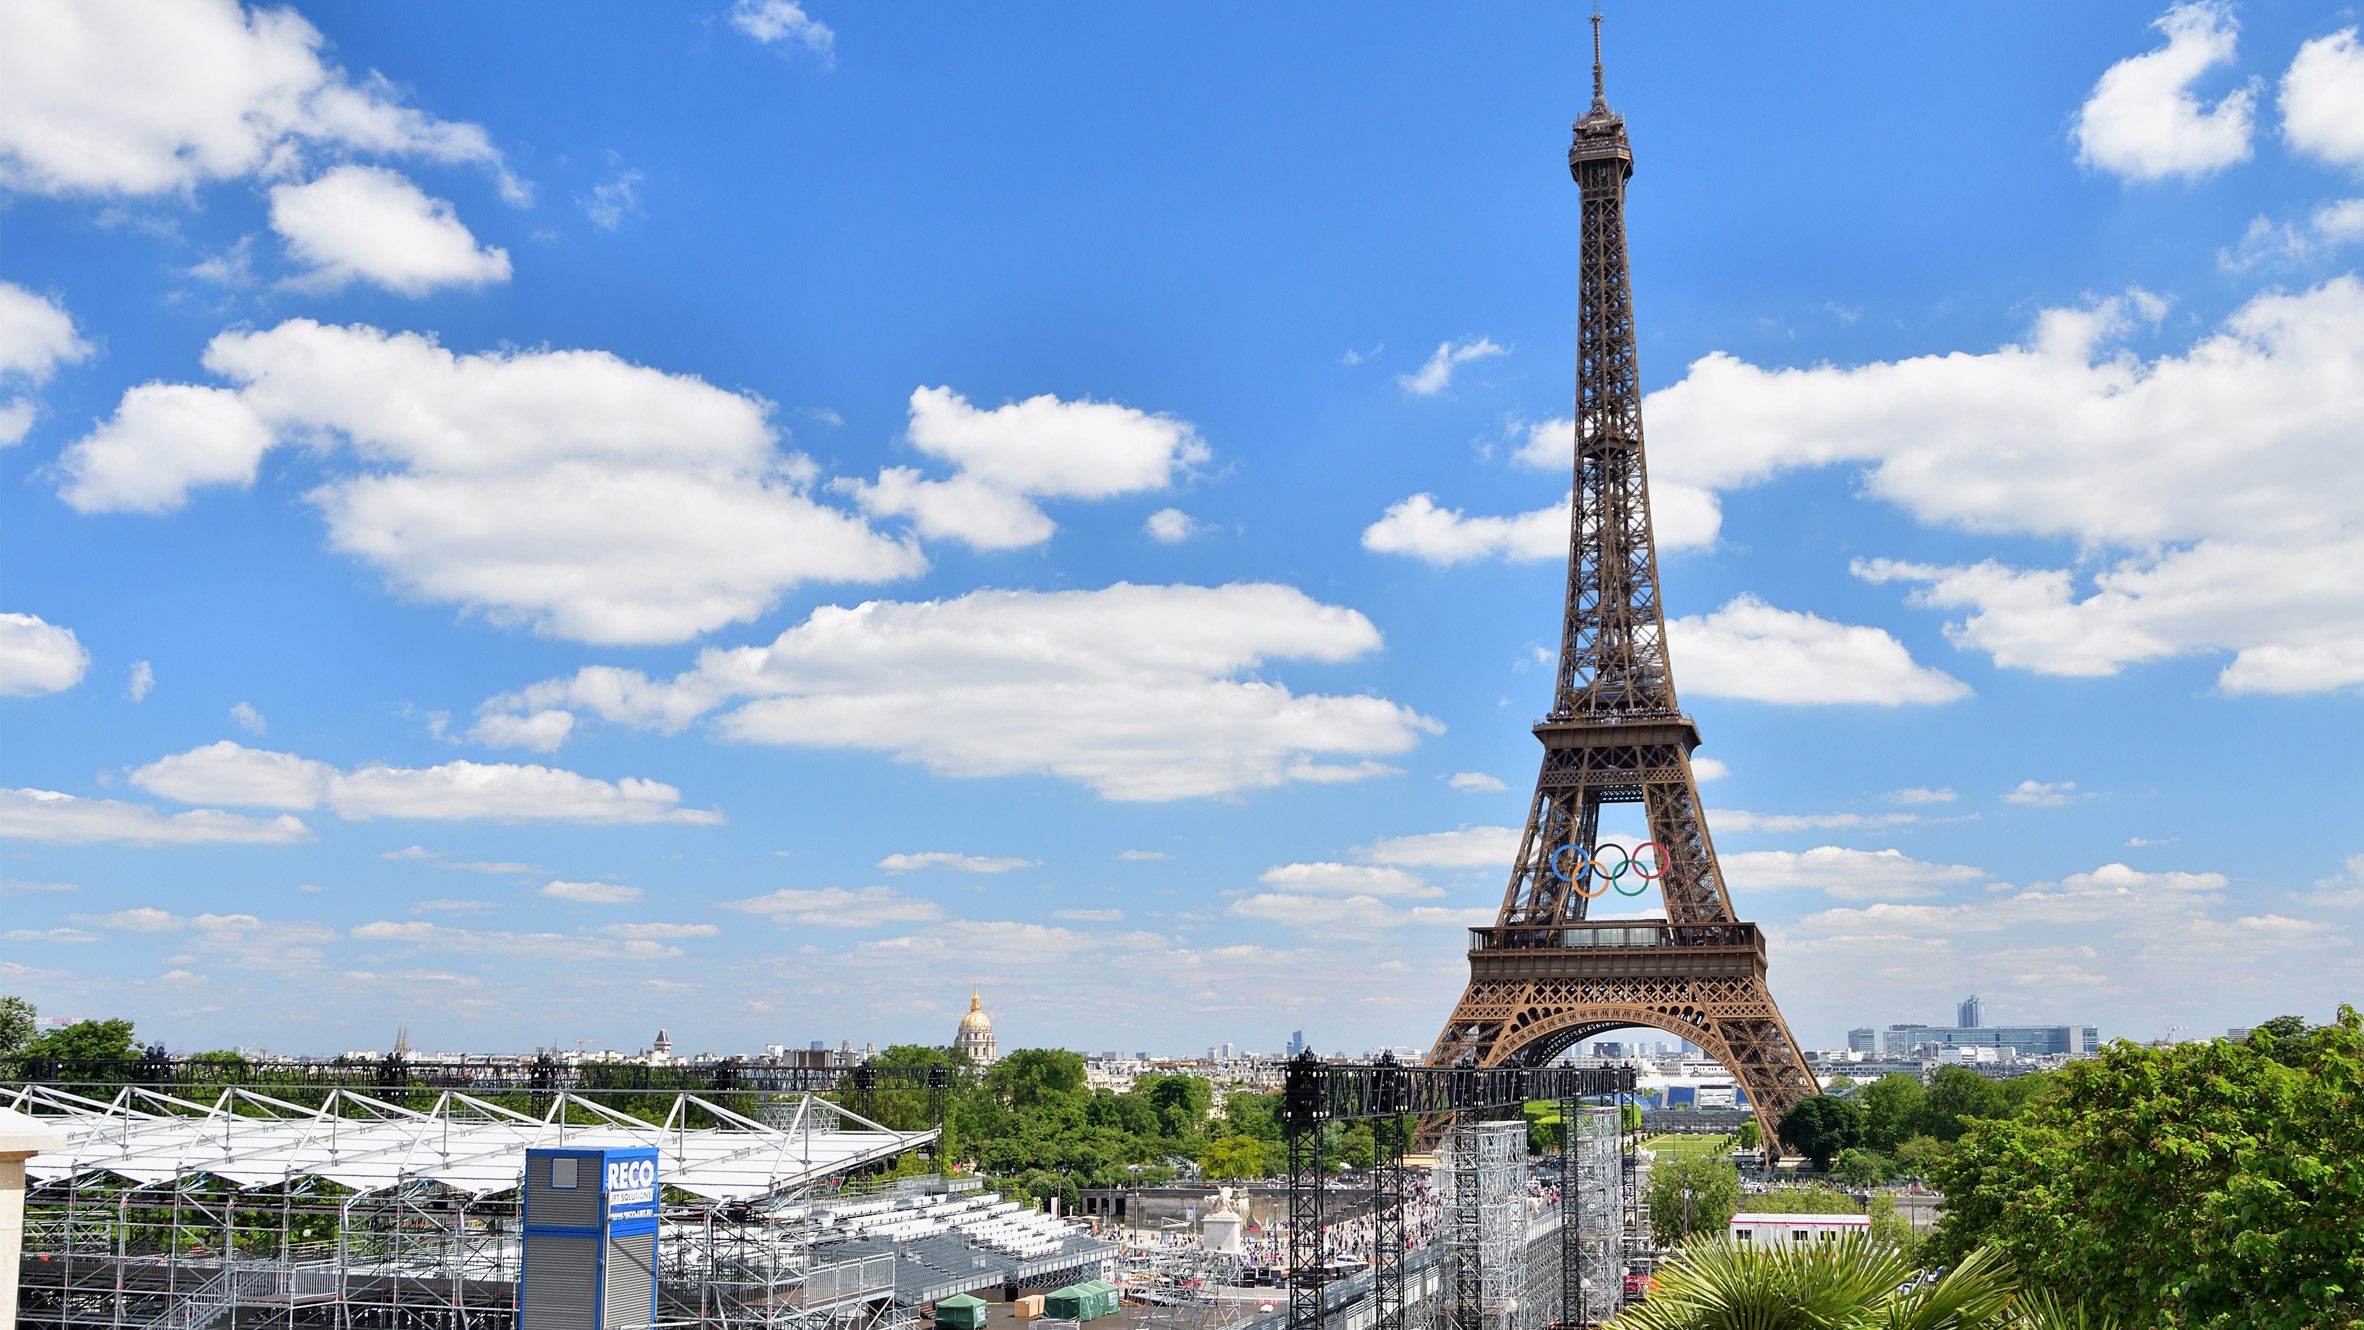 The Eiffel Tower ready for the Paris 2024 Olympic Games